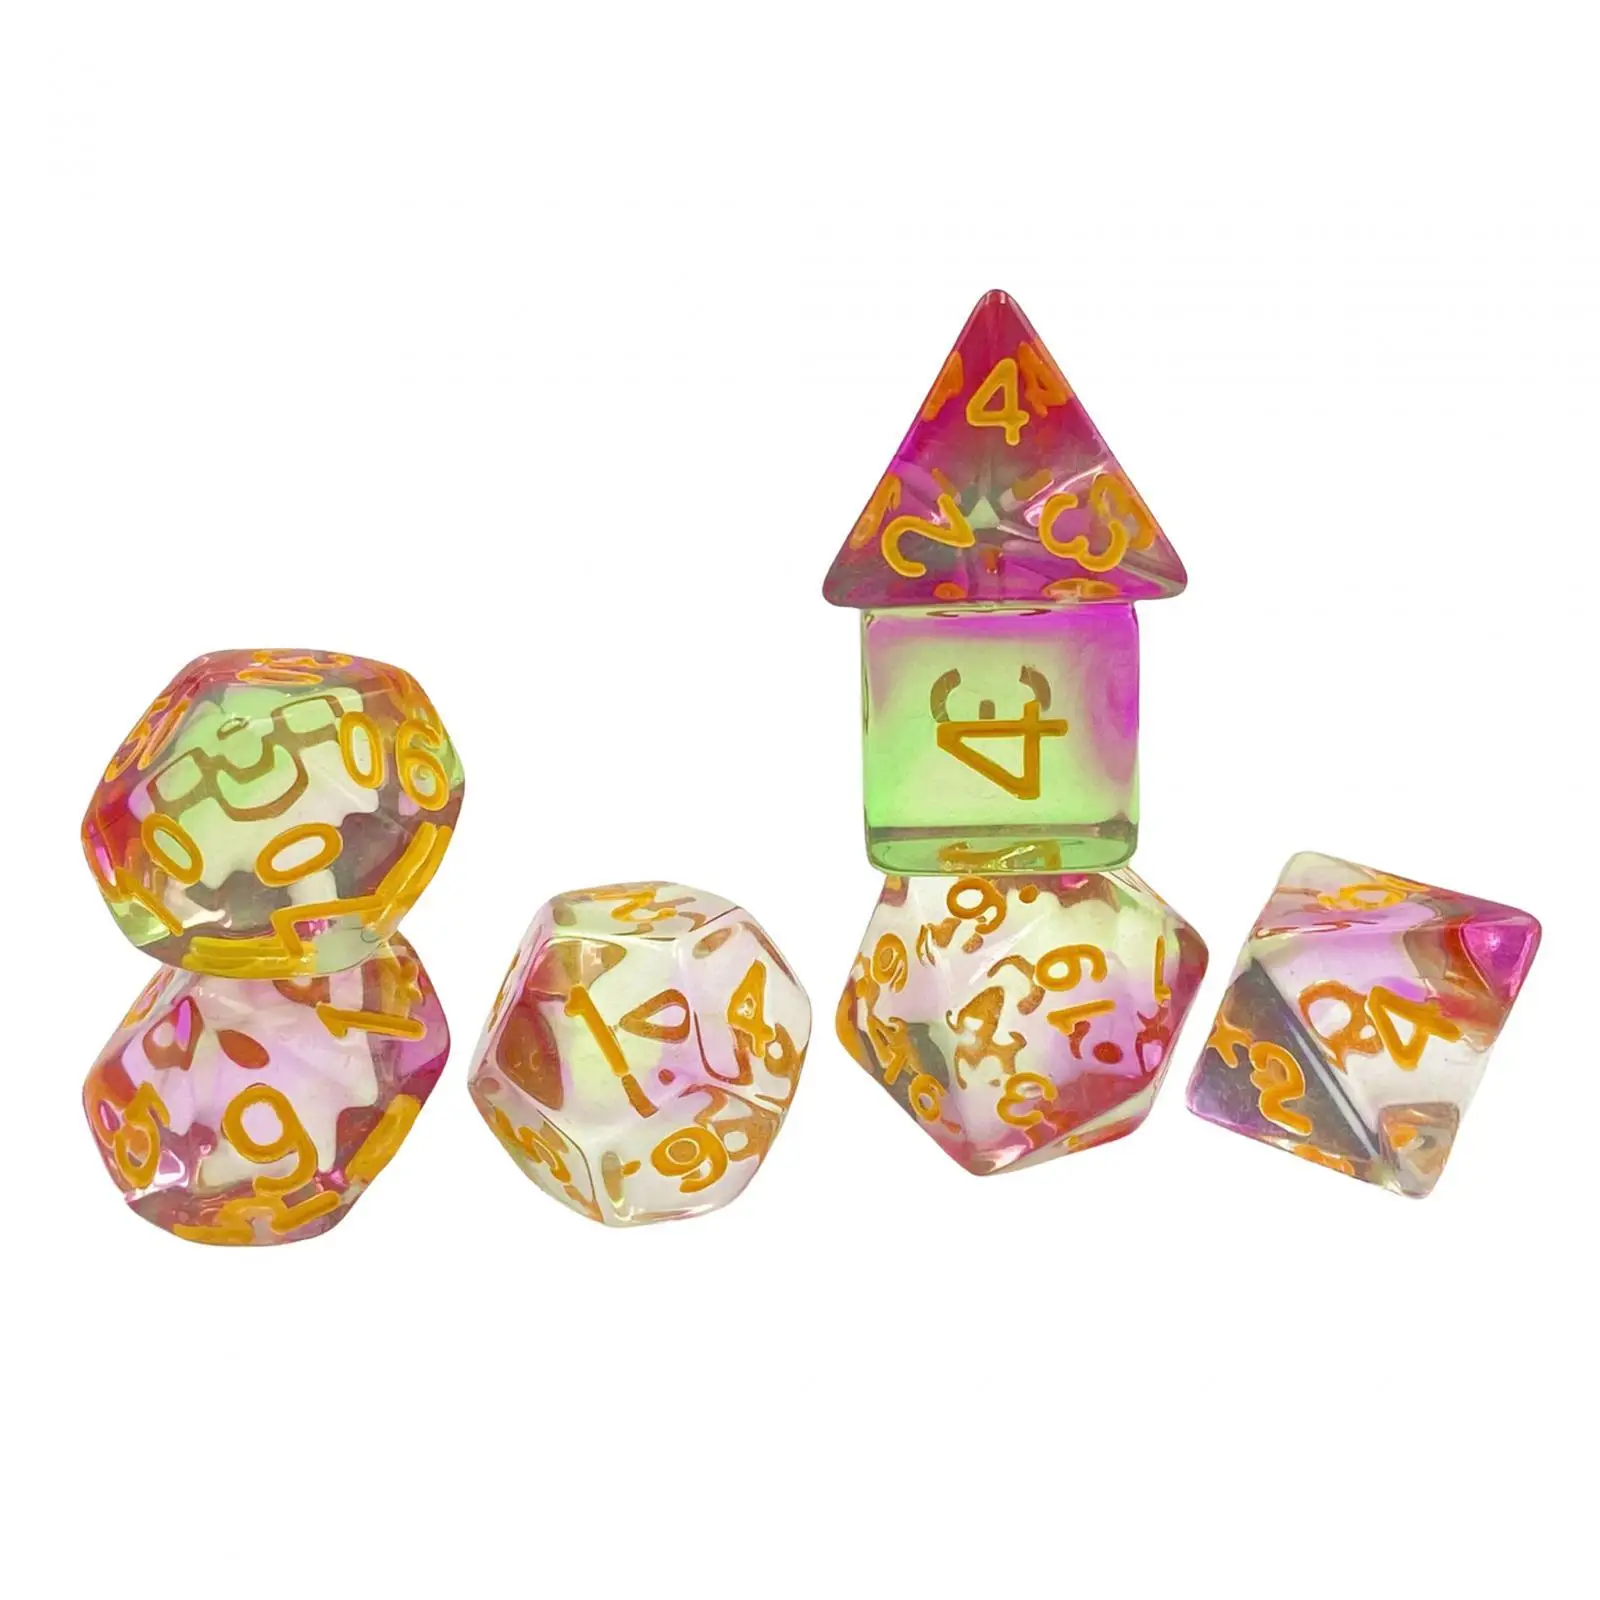 7x Acrylic Dices Playing Dices Party Favors D4-d20 Polyhedral Dices Set for Table Game Role Playing Game Card Games Party Game